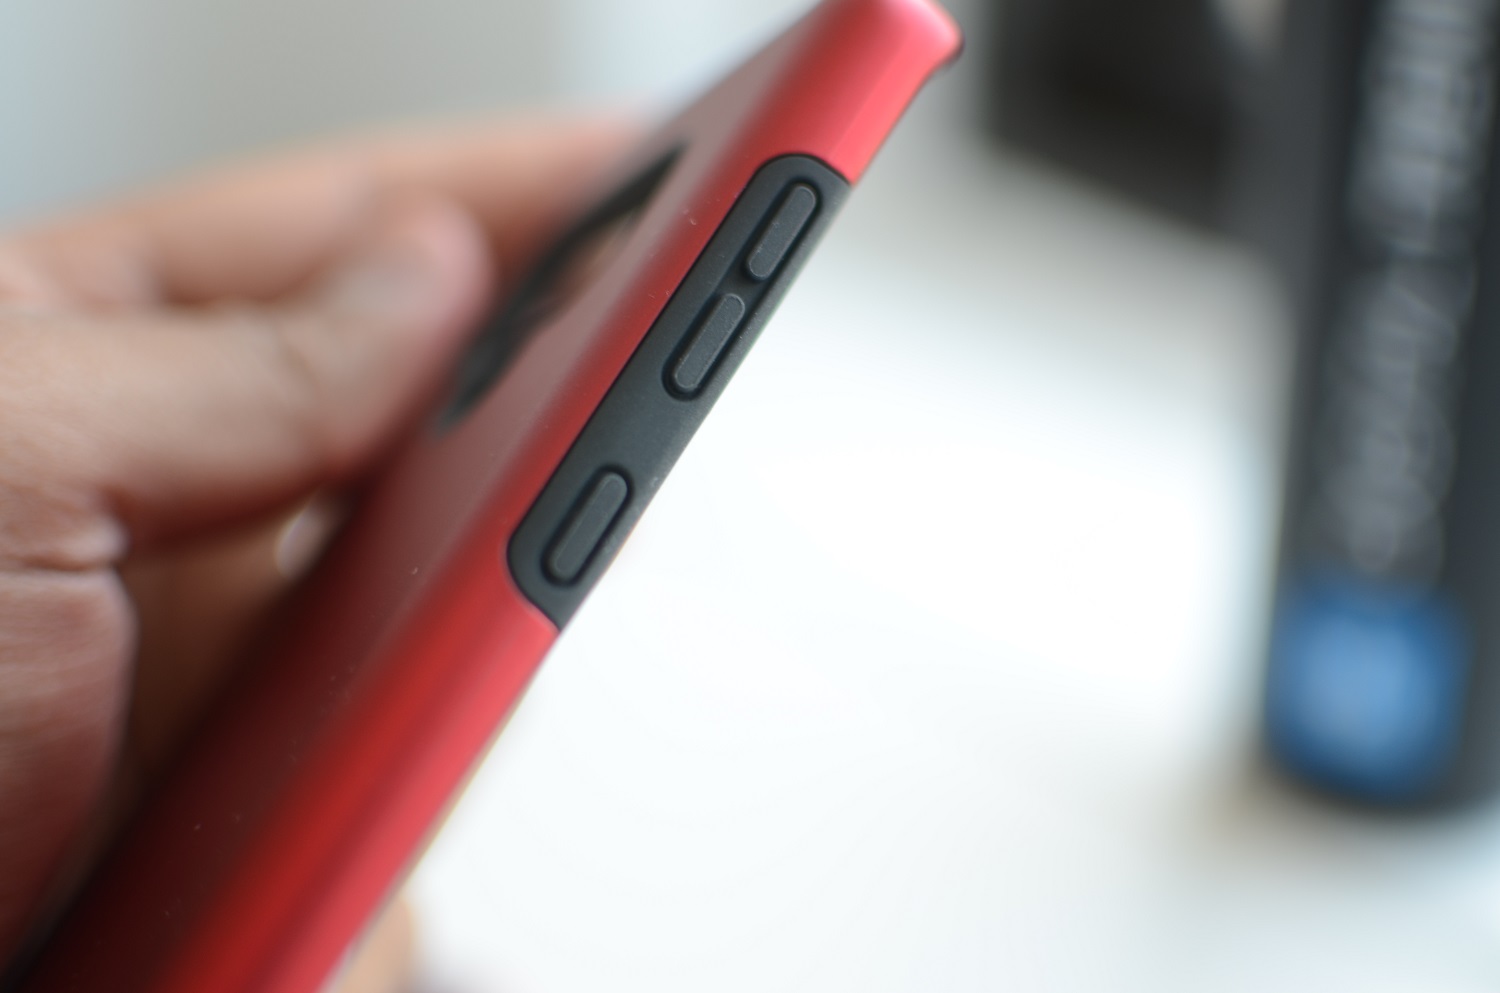 Best Samsung Galaxy Note 9 cases: Top picks in every style